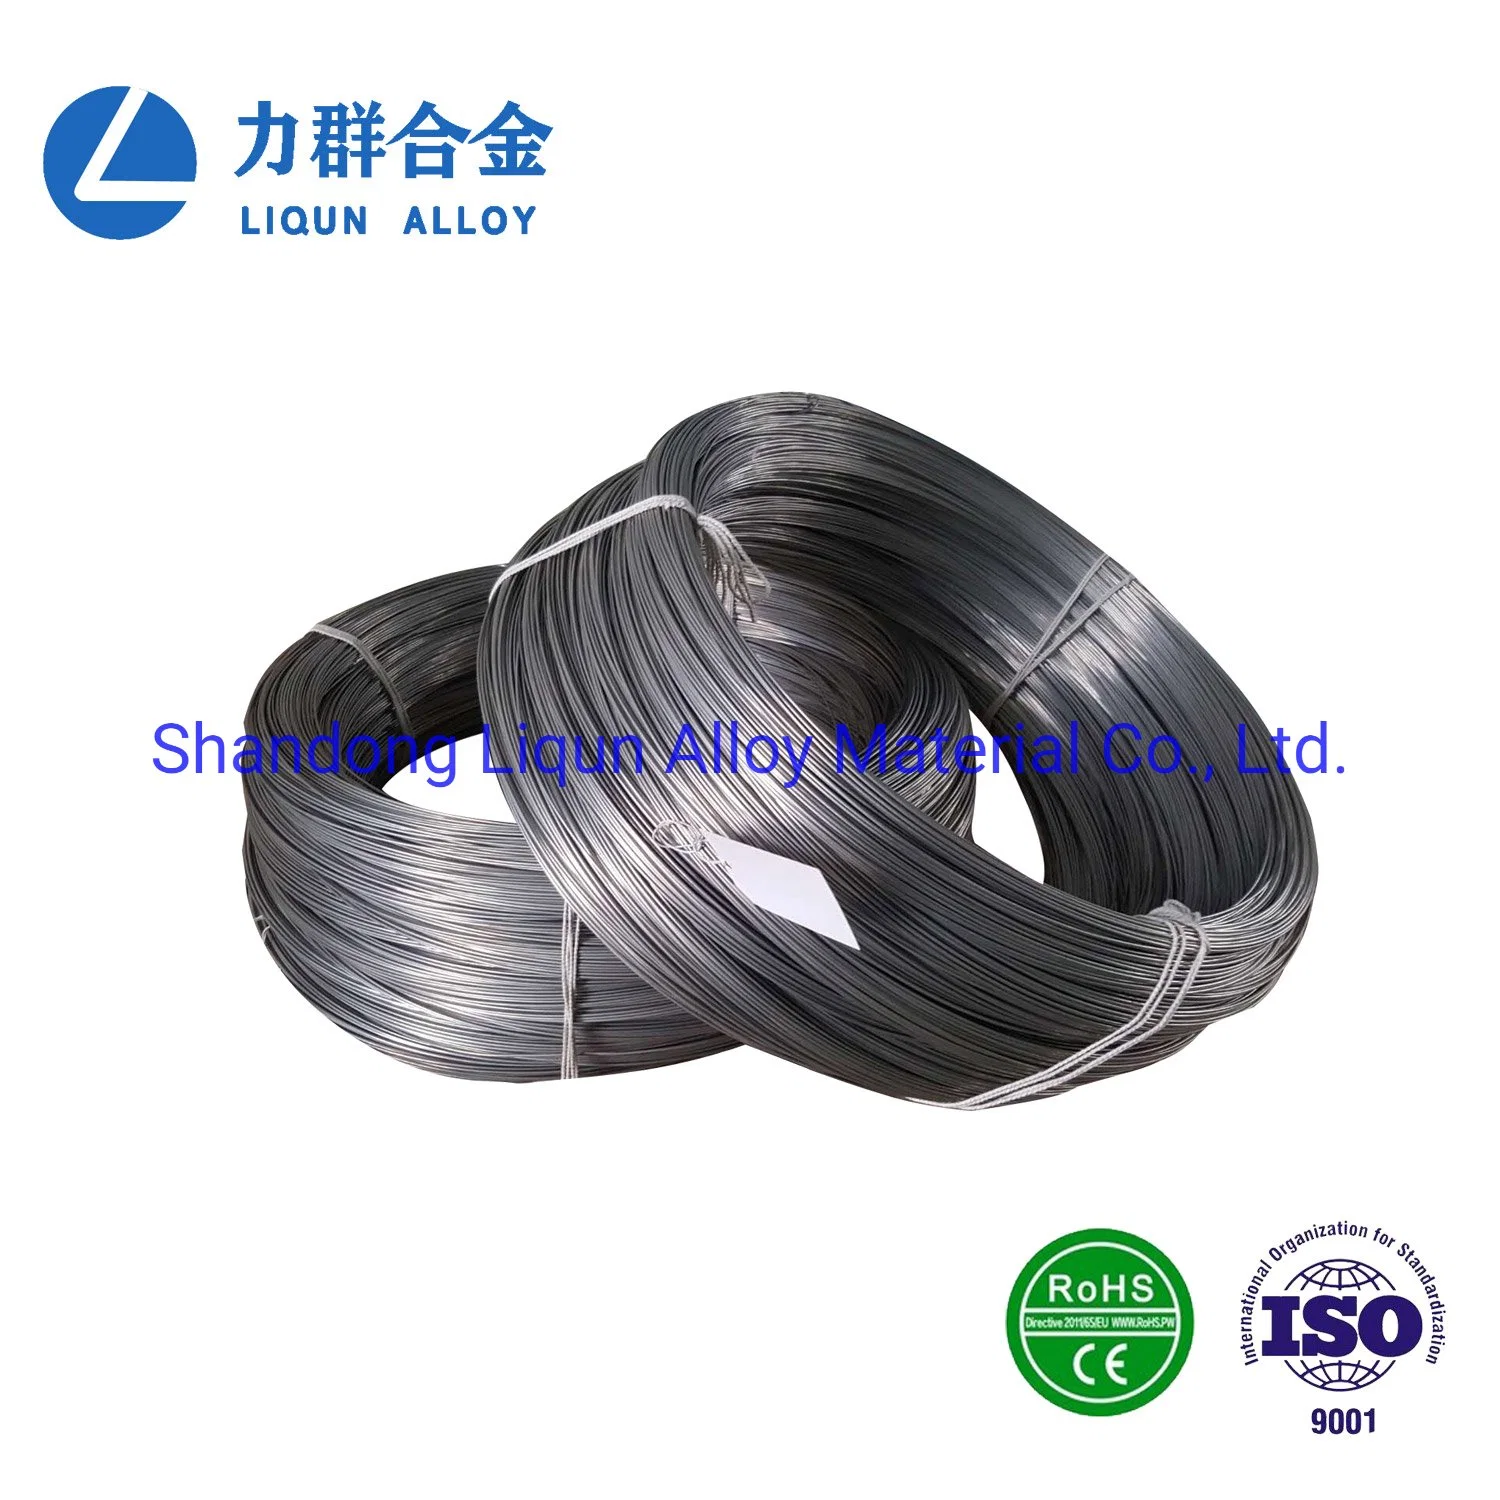 9AWG Type J Iron -Copper nickel /constantan alloy resistance wire  high temperature 100 degree to760 degrees for thermocouple sensor/electrical cable